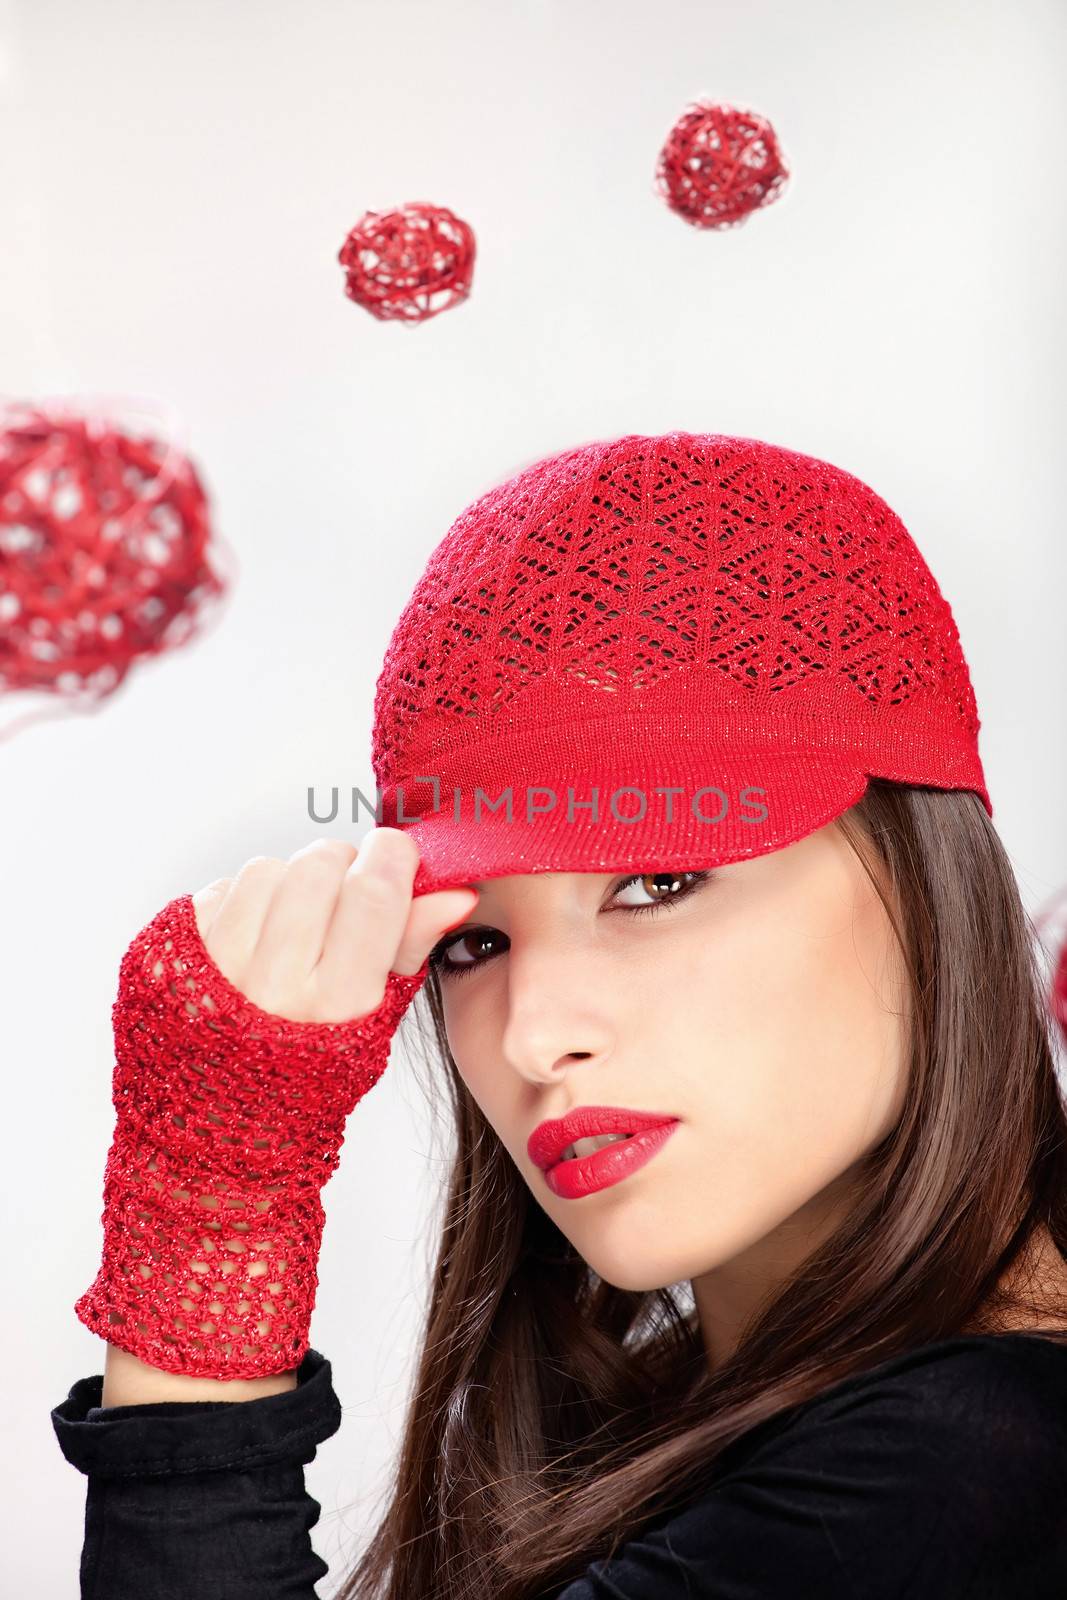 Pretty woman with red hat and gloves